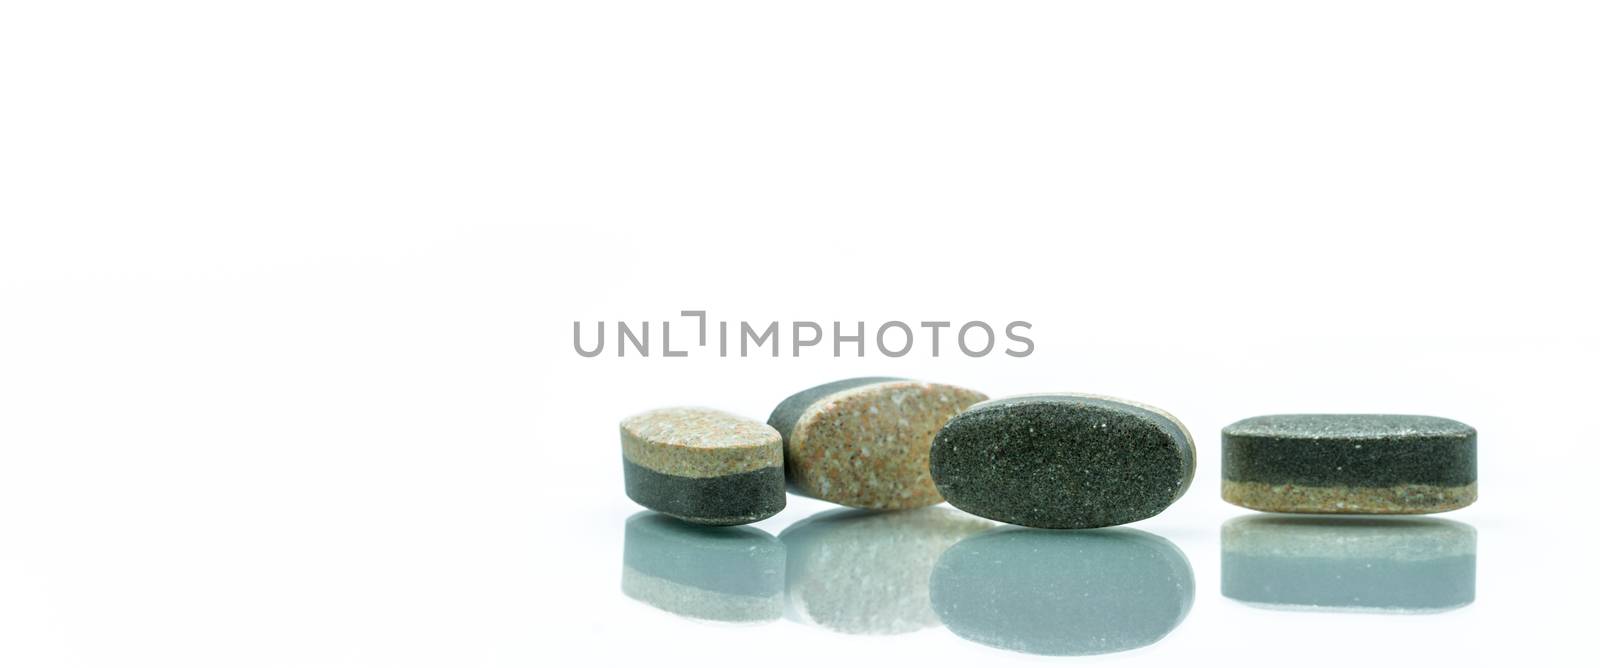 Essential Vitamins and minerals supplements dual layer tablet pills isolated on white background. Multivitamins plus reishi mushroom, wheatgrass, white tea and organic spirulina. Whole food nutrients.